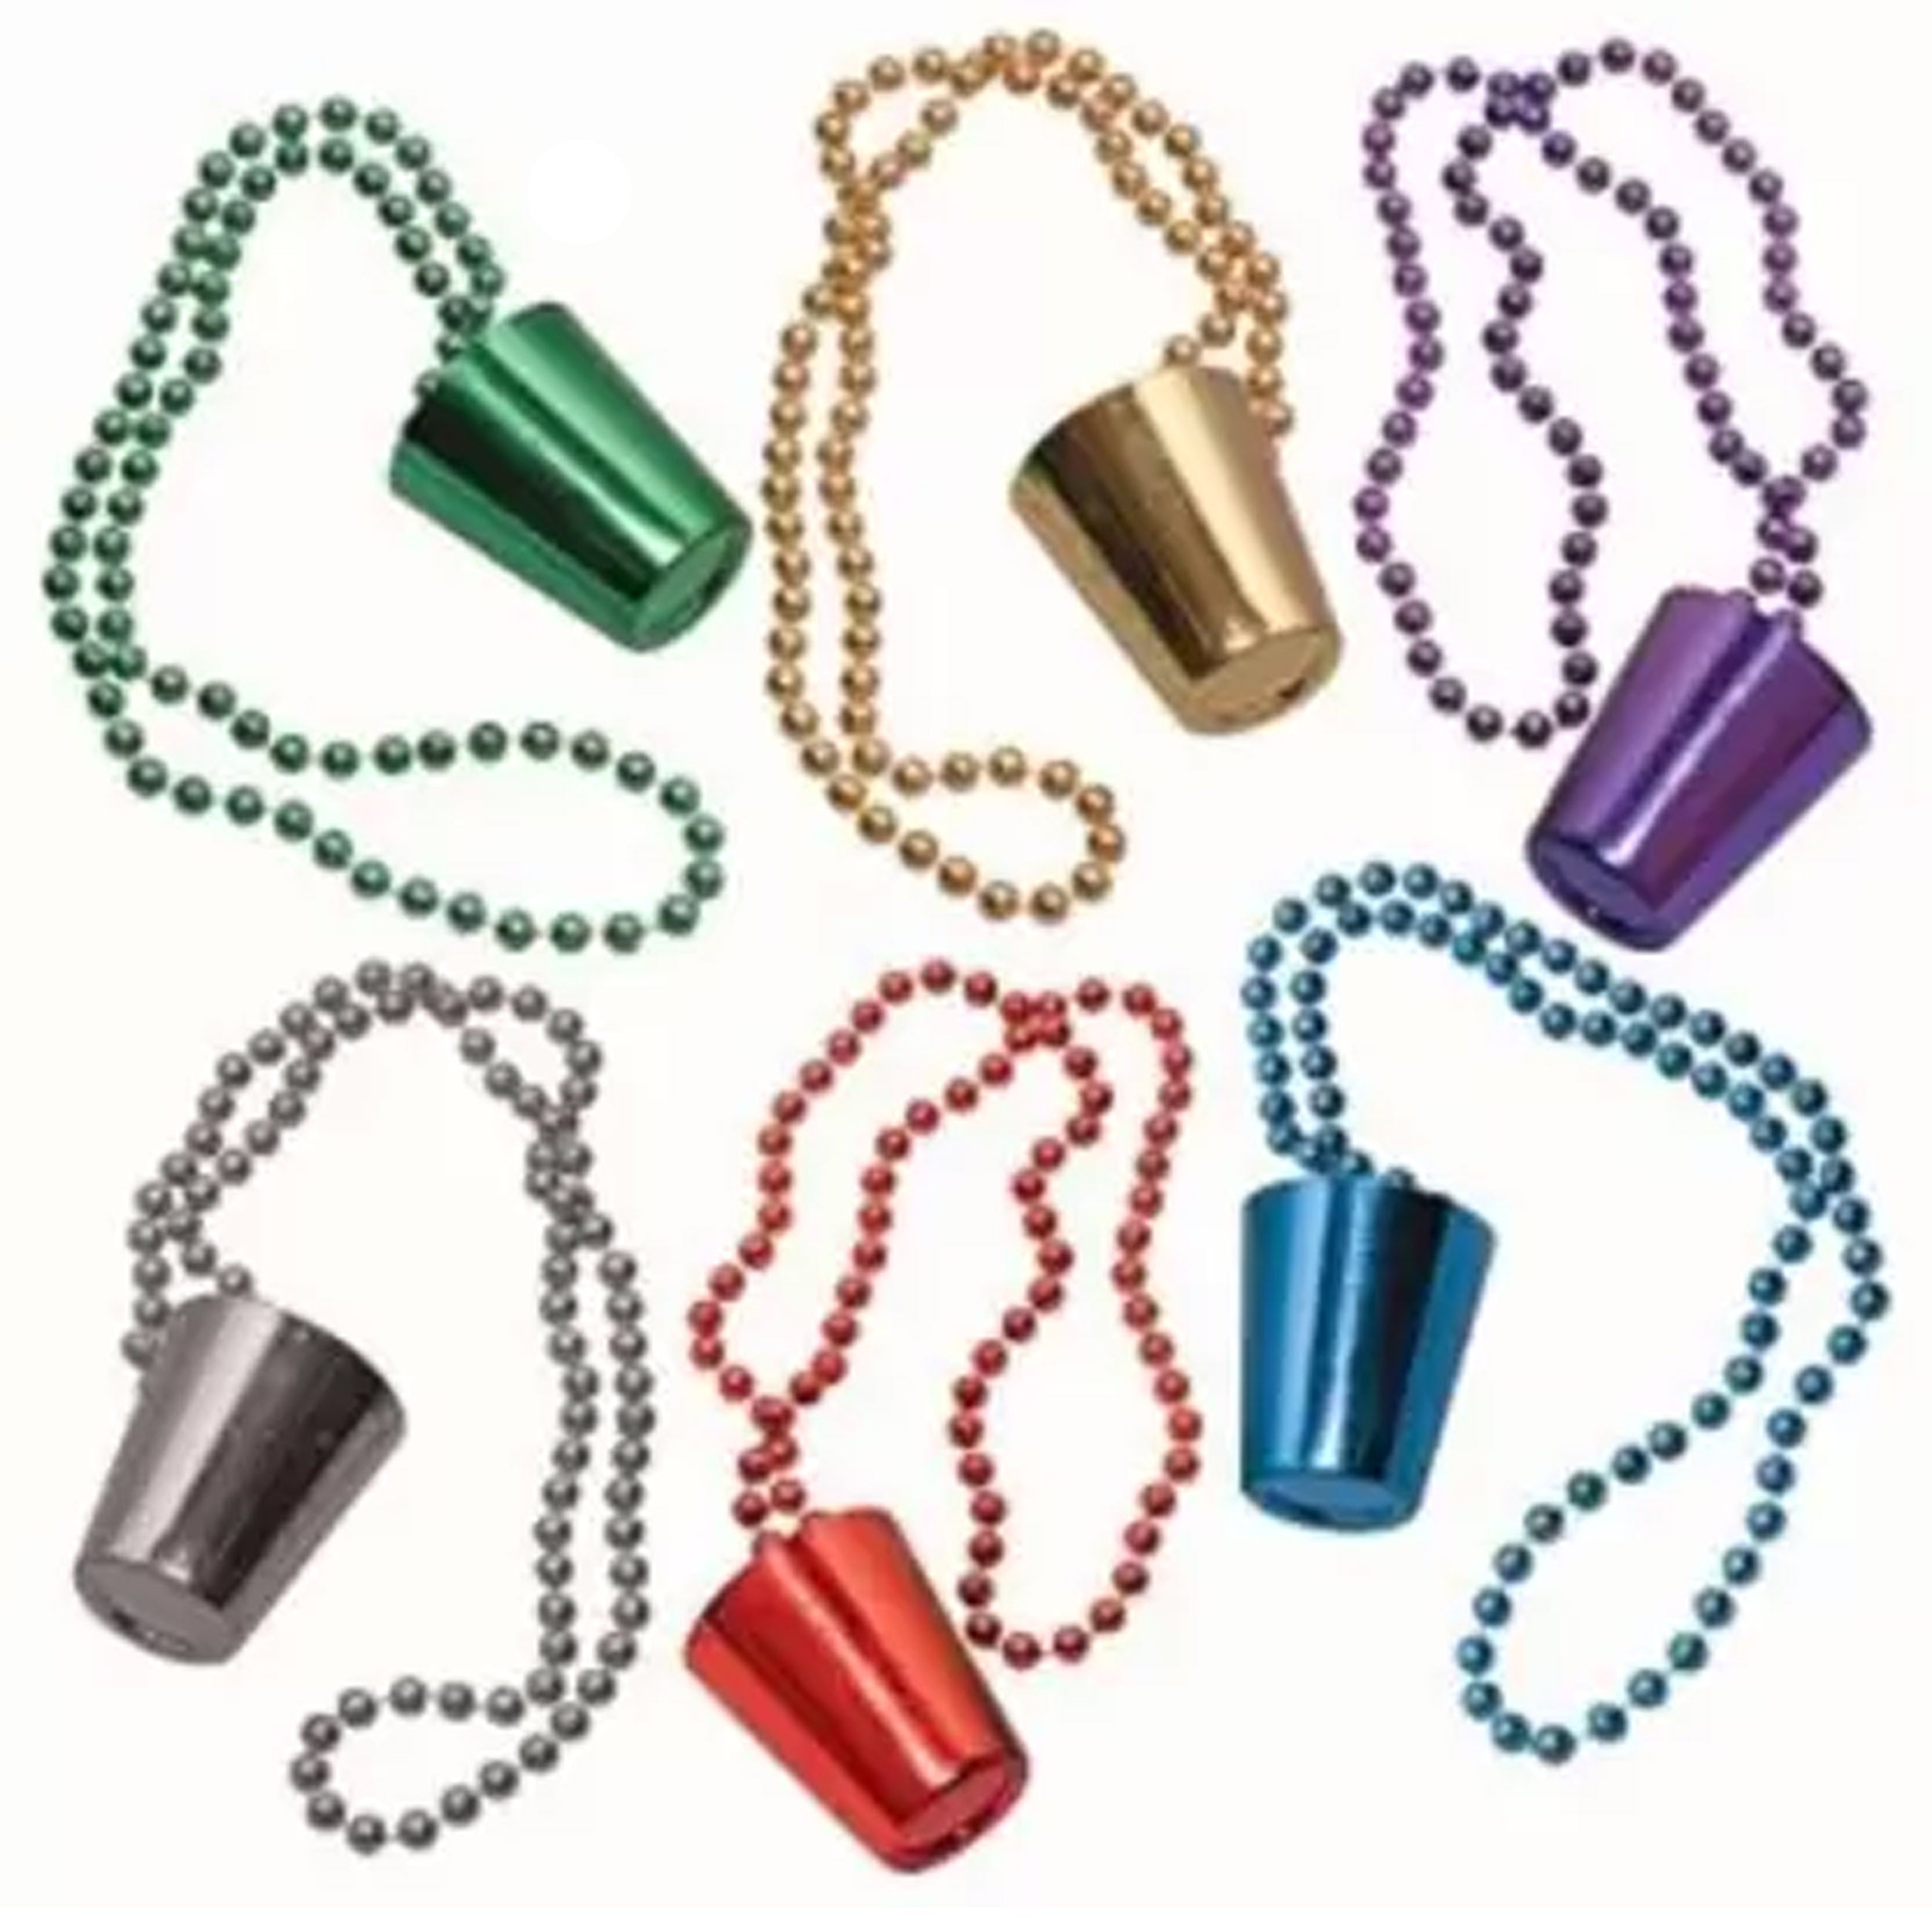 Stylish Glass Beads Necklaces -Assorted